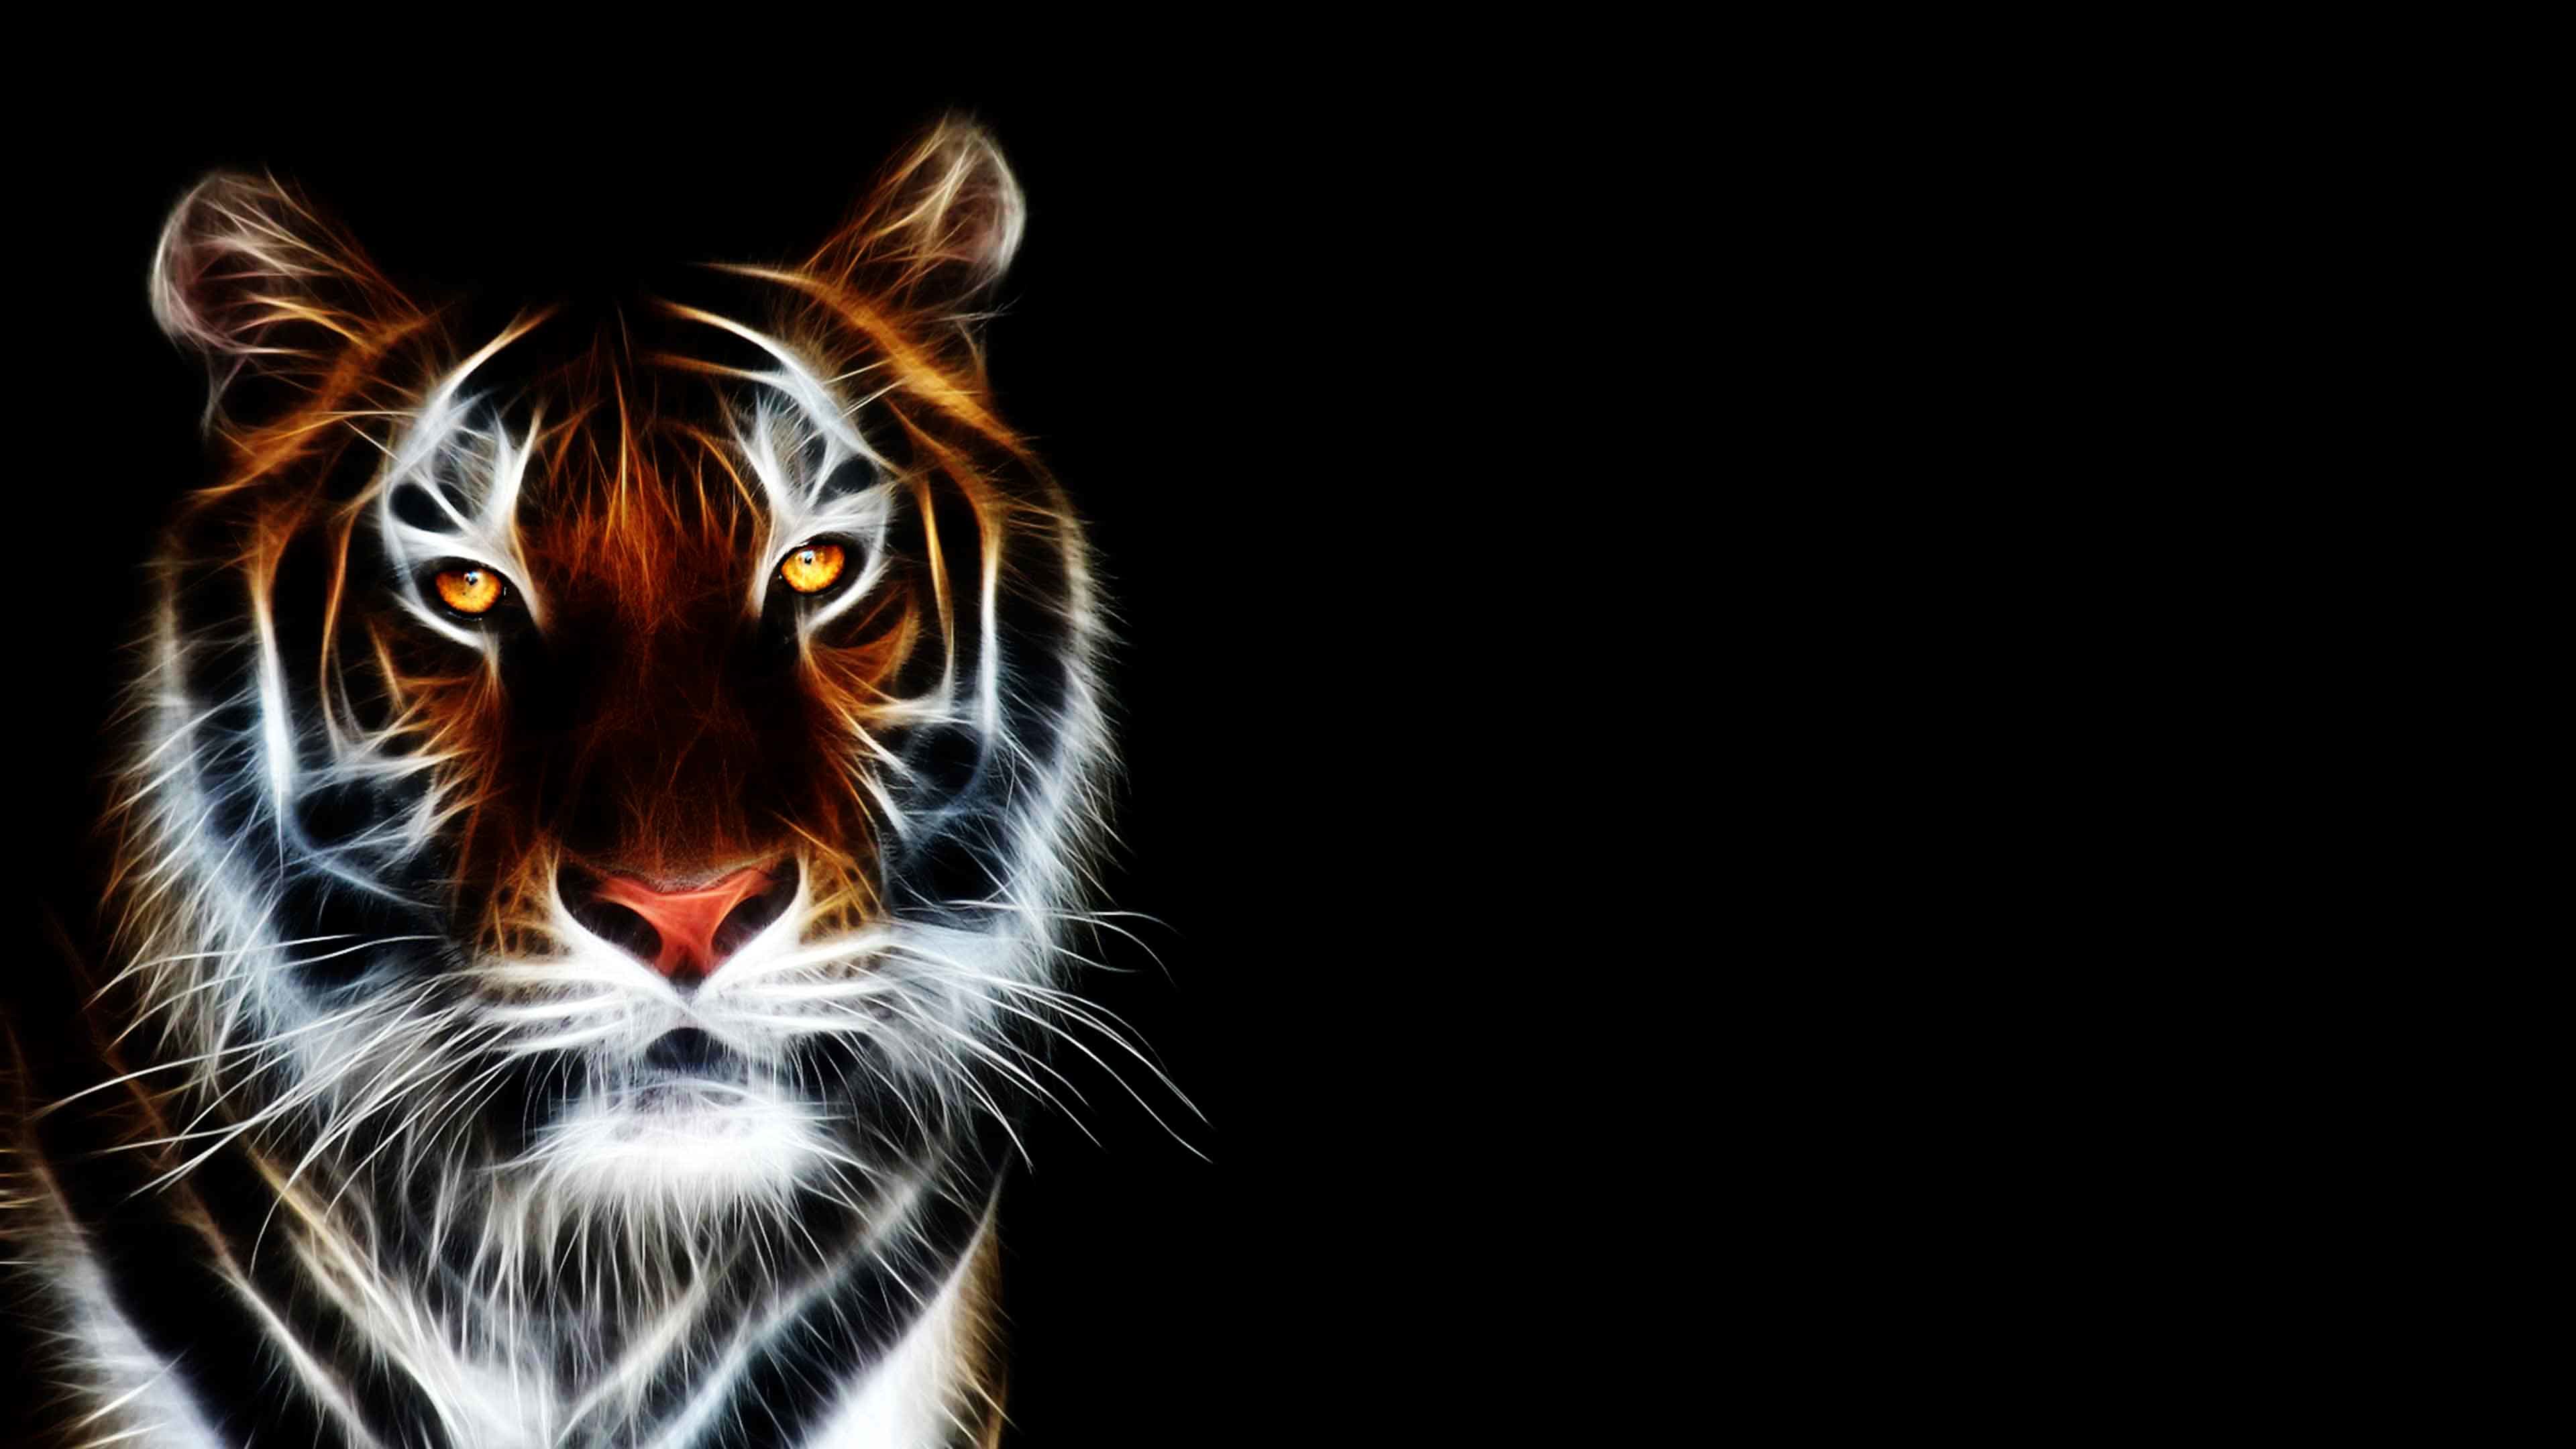 3840x2160 3D Animated Tiger Wallpaper